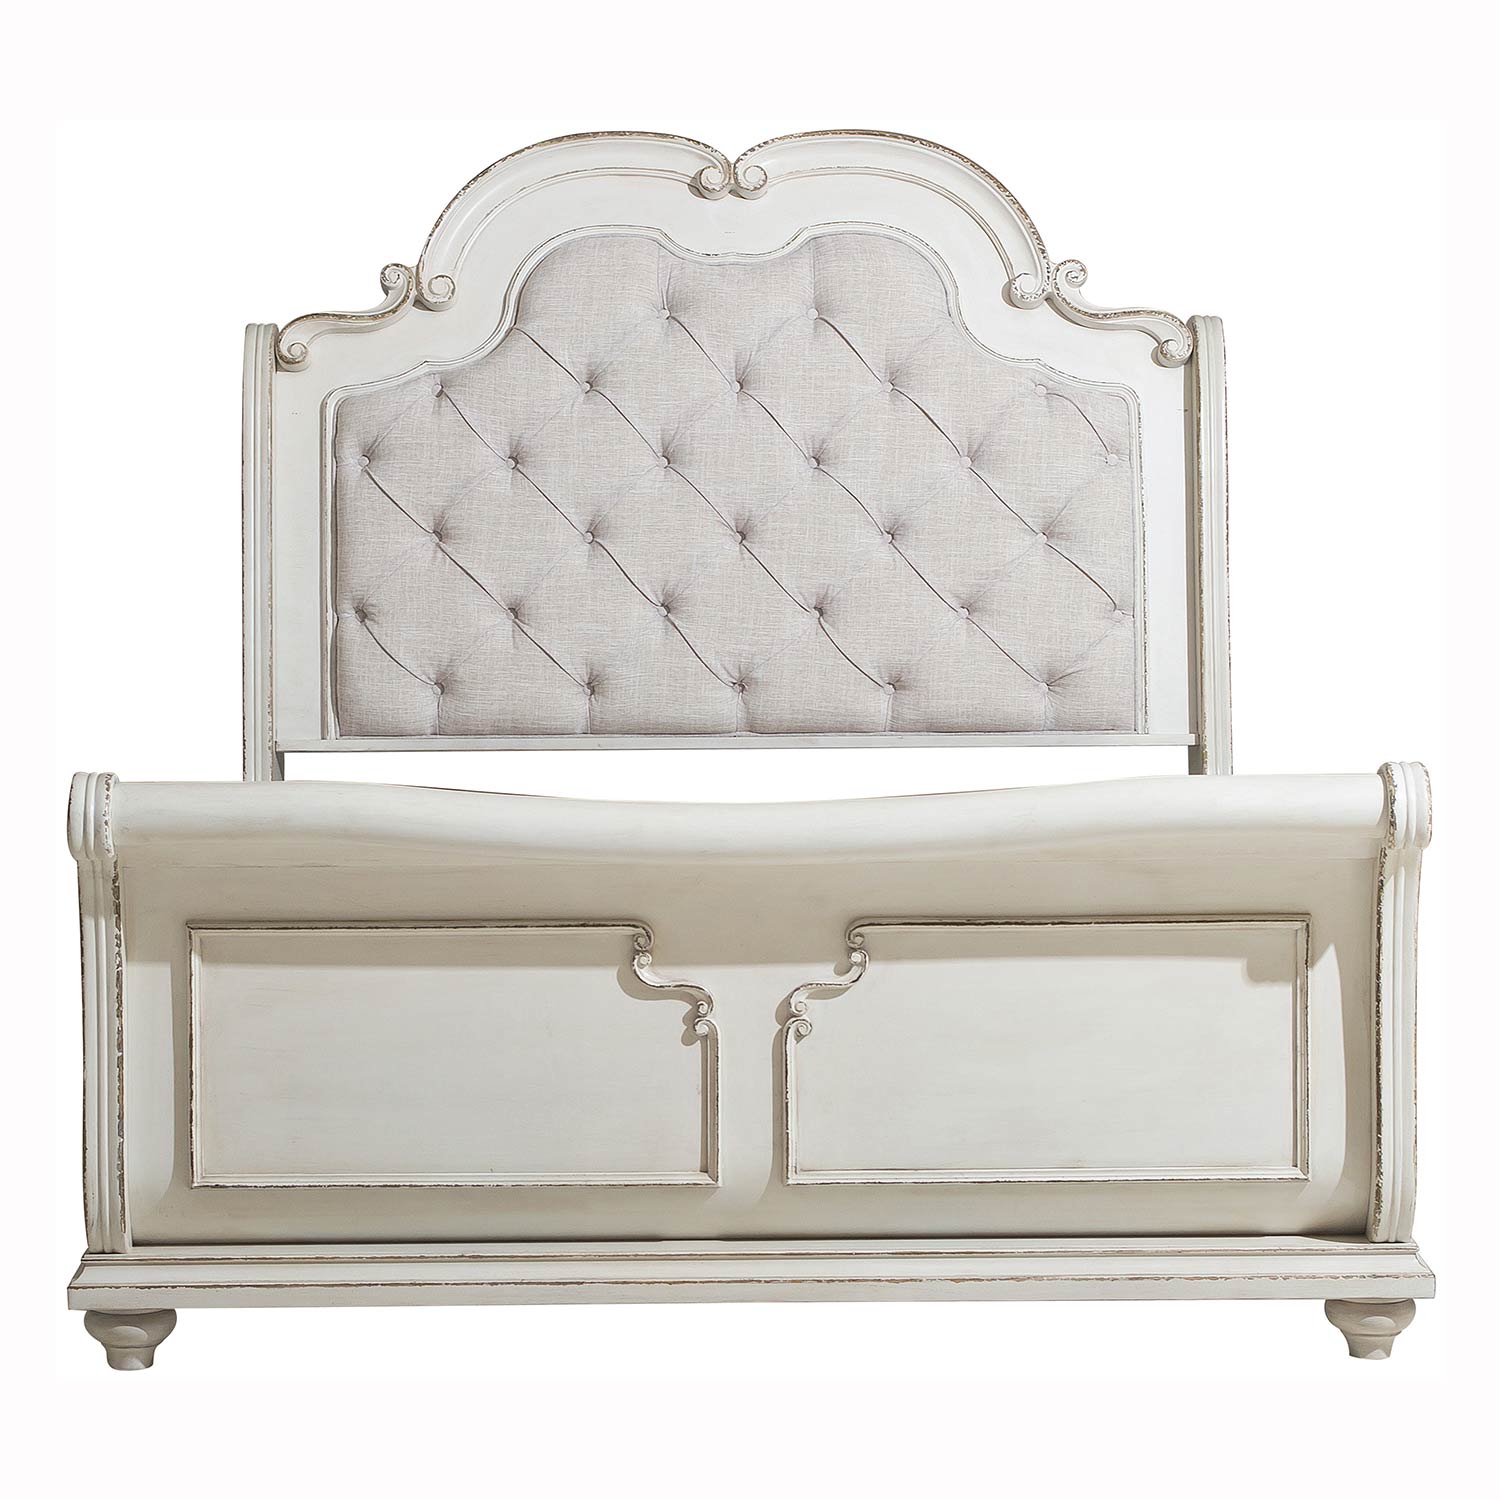 Homelegance Willowick Sleigh Bed - Antique White Finish